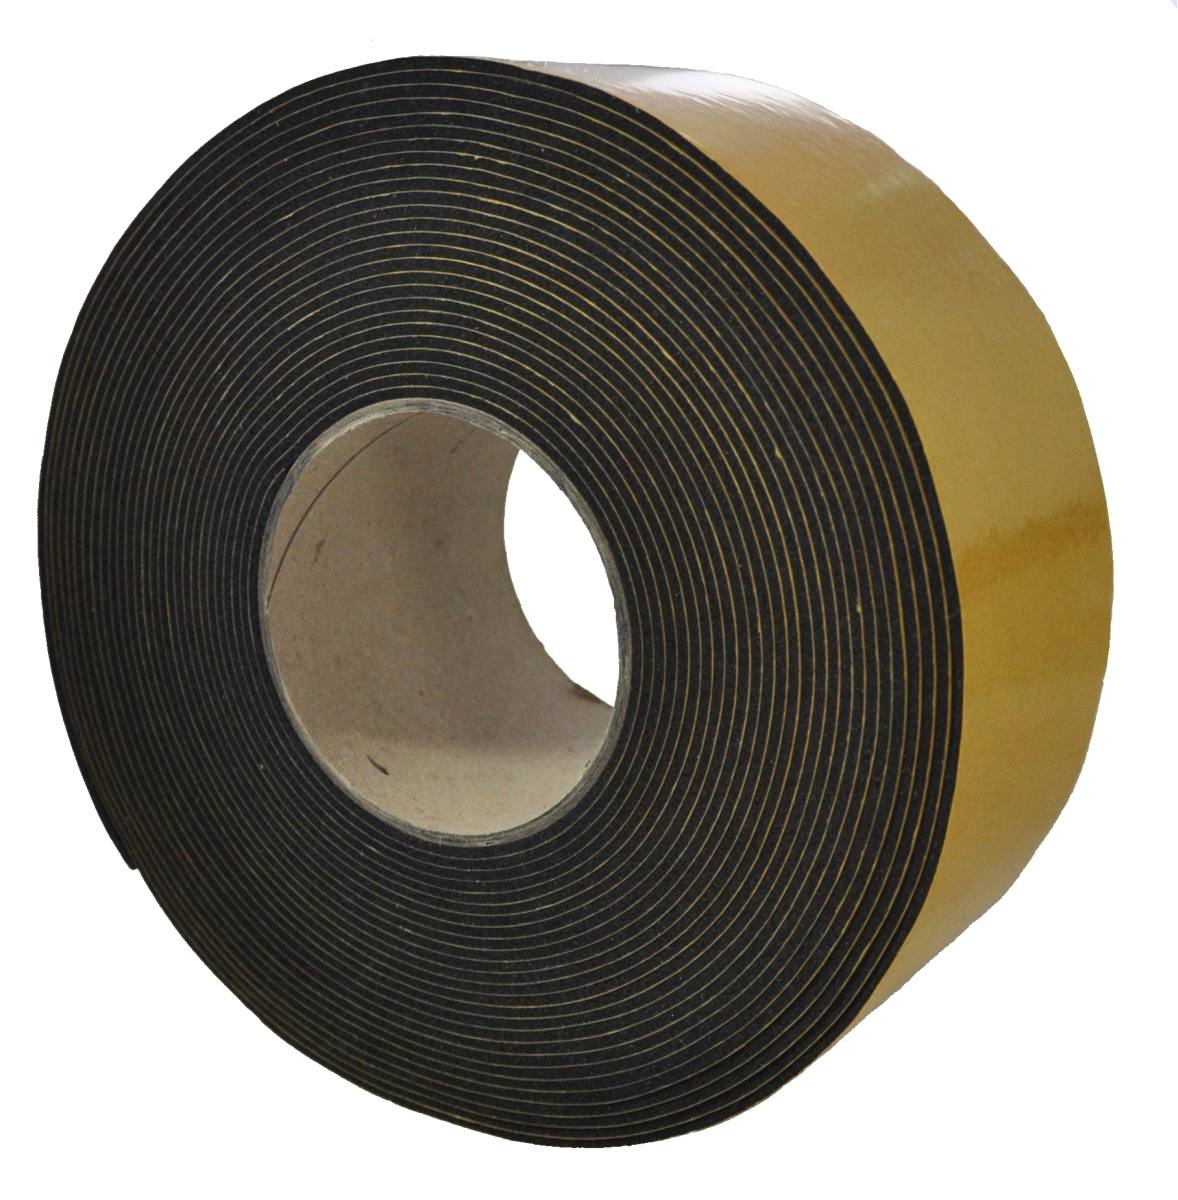 S-K-S EPDM 5mmx9mmx10m black self-adhesive on one side